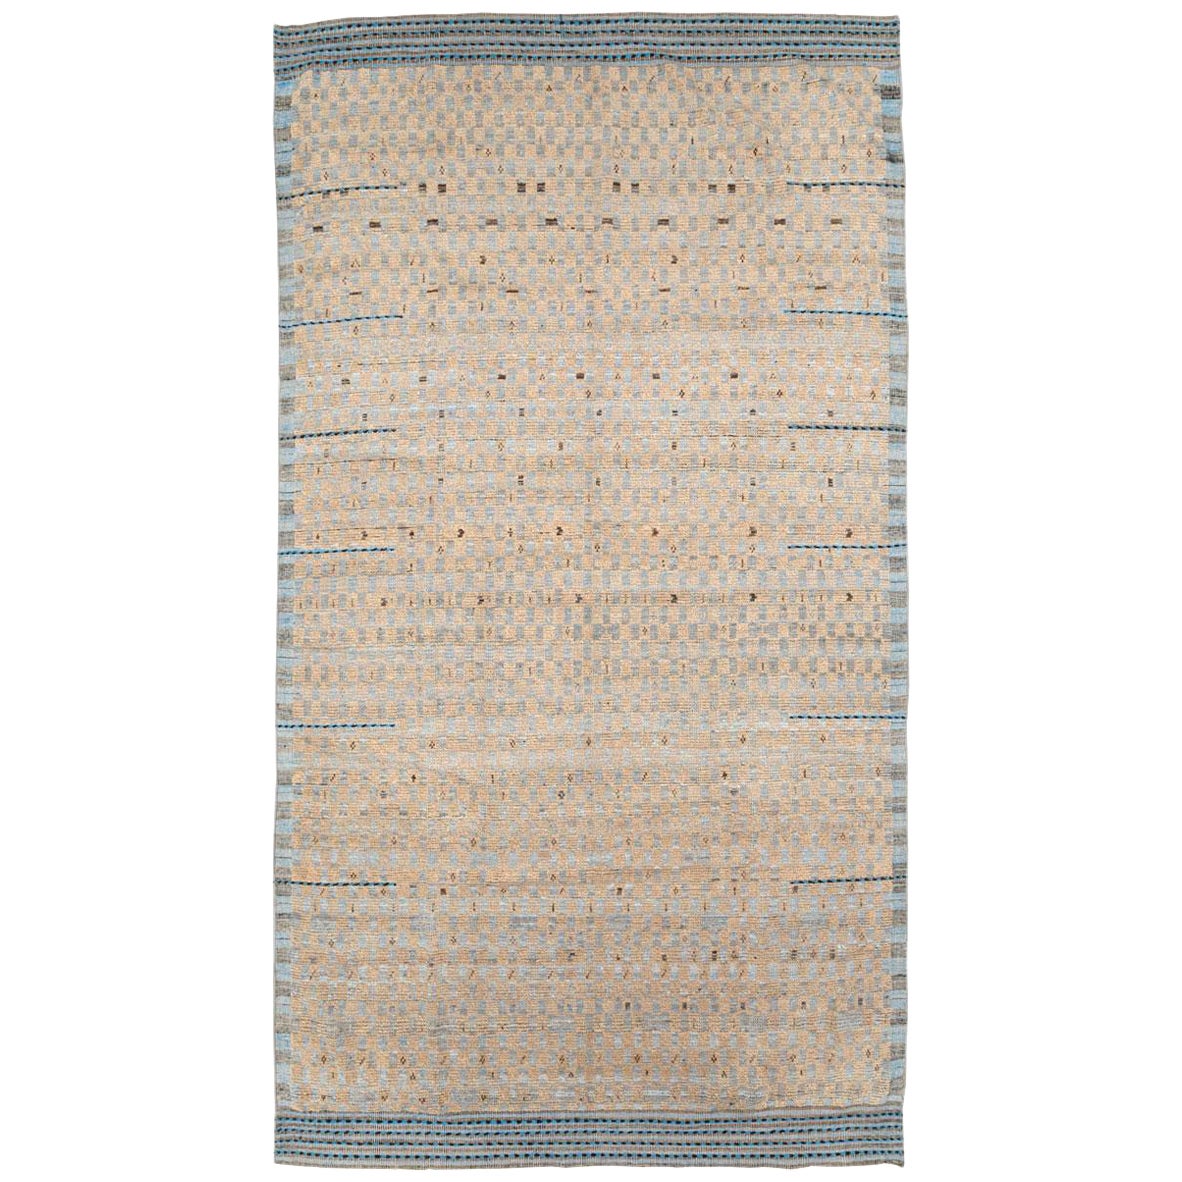 Galerie Shabab Collection Moroccan Inspired Contemporary Turkish Large Carpet